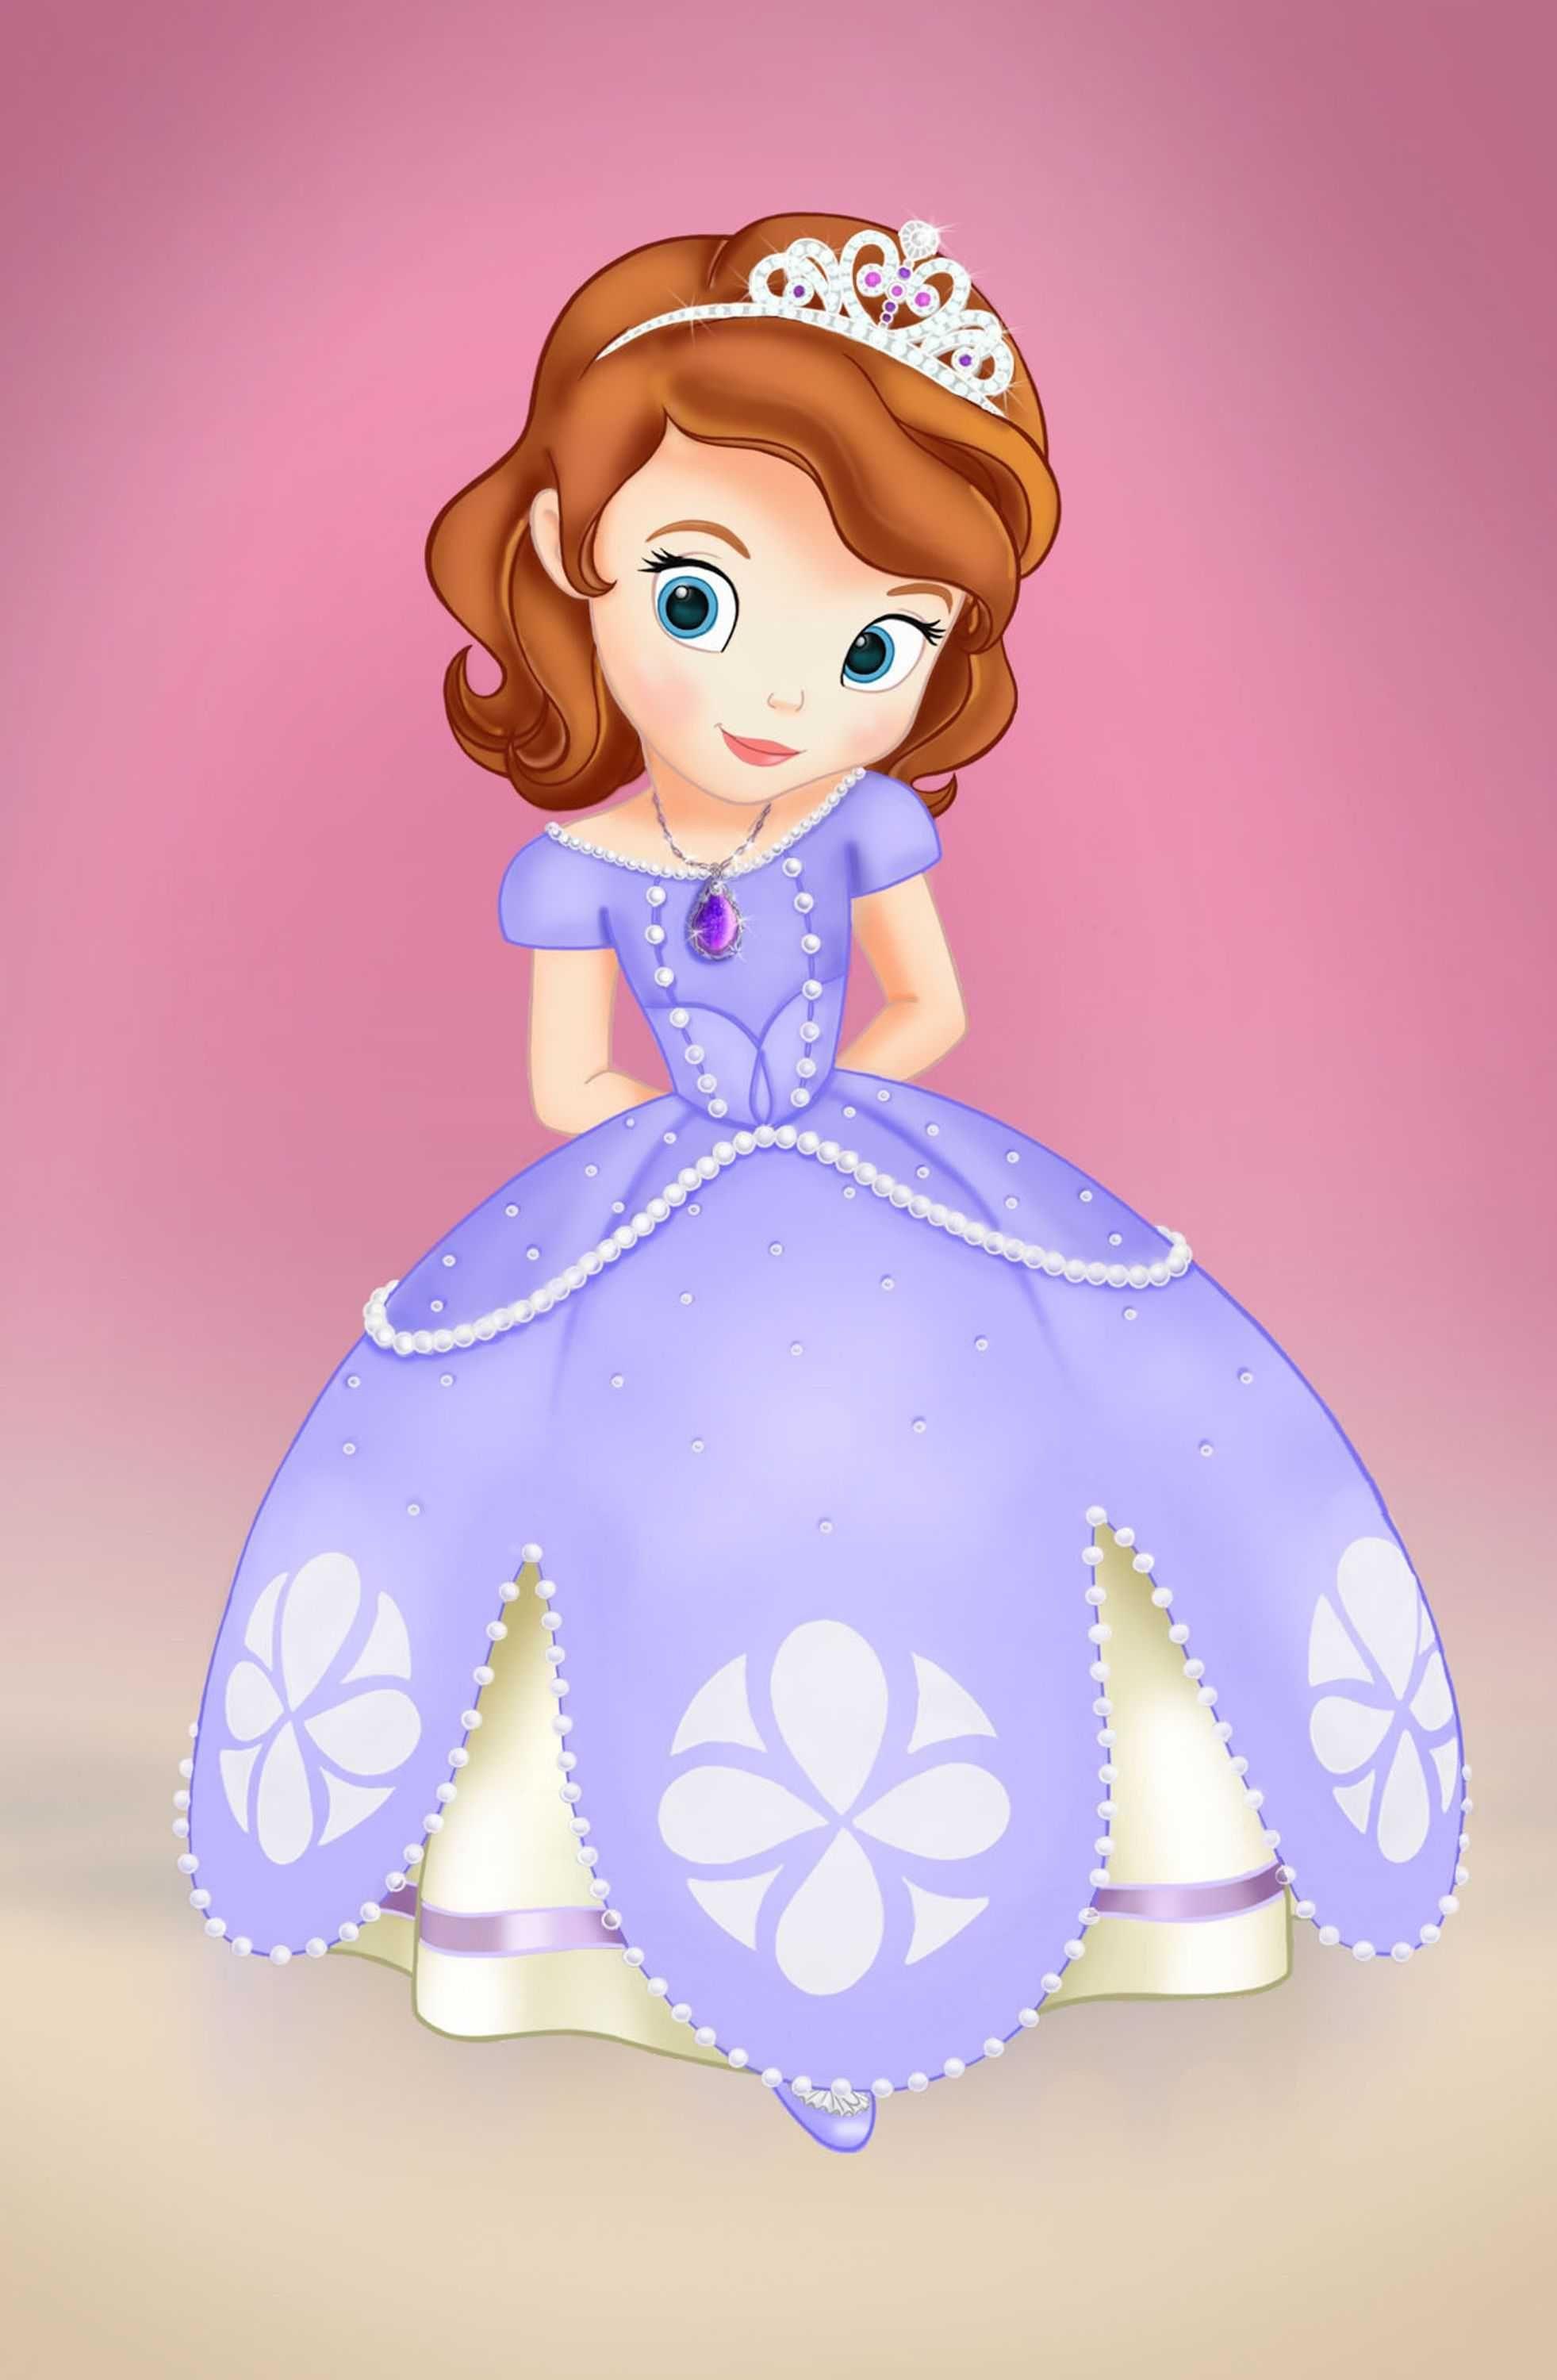 Full HD For Princess Sofia Wallpaper The First Mobile Phones Waraqh